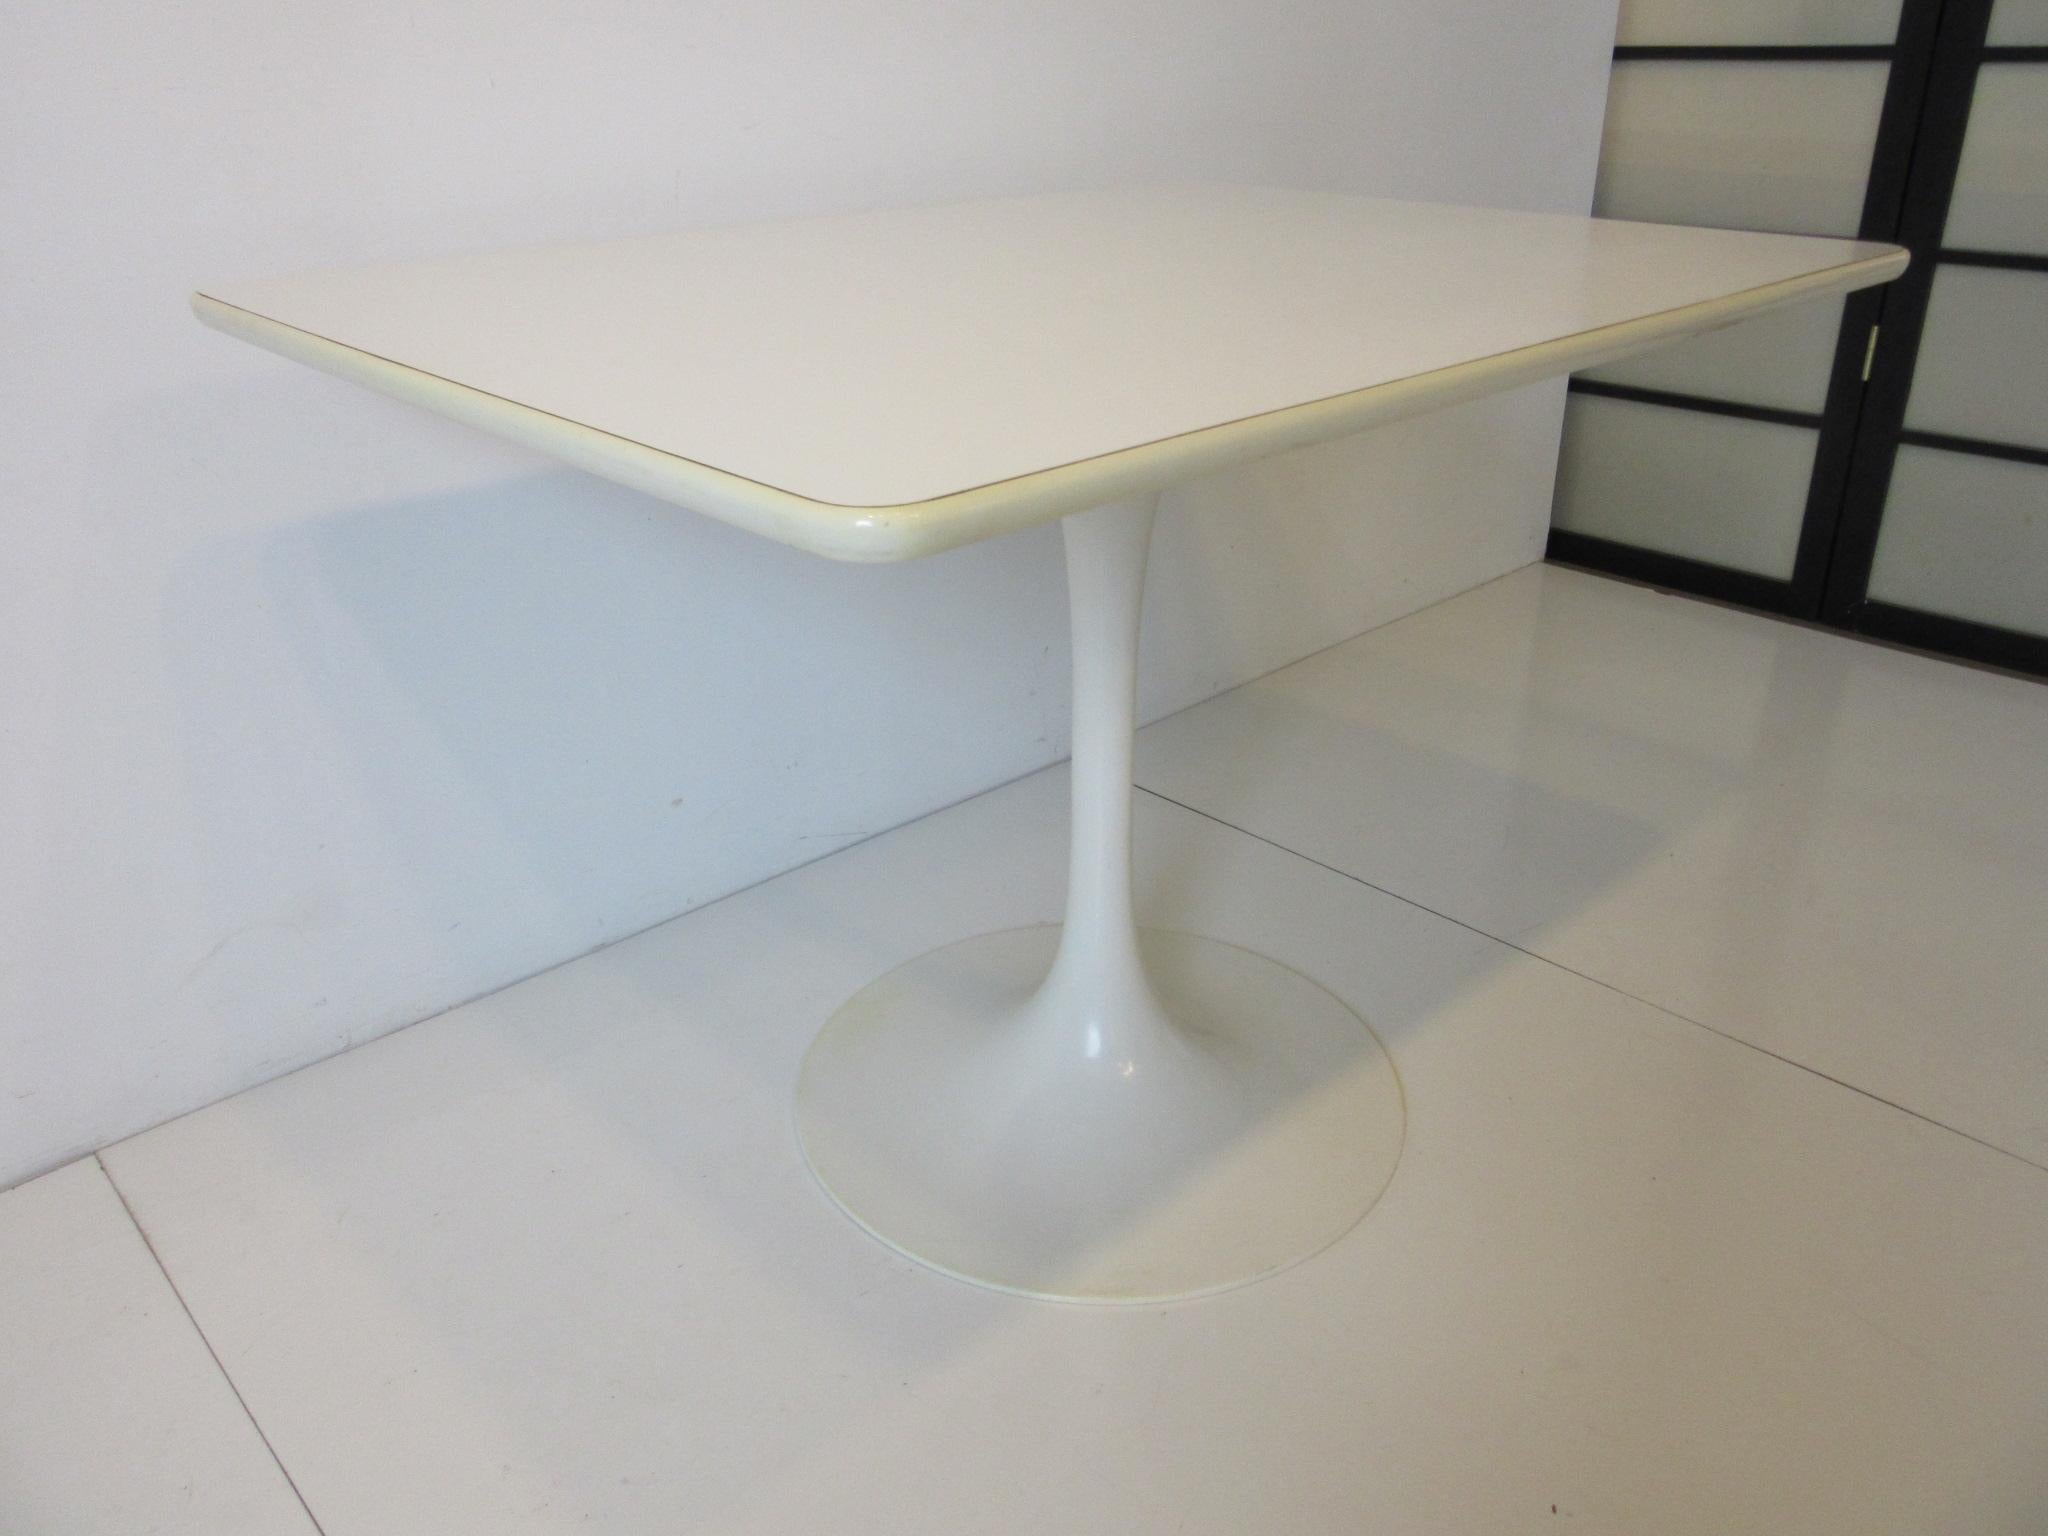 A hard to find rectangle tulip based cafe or smaller dining table with white laminate top, rubber edge strip and metal base. Manufactured by the Burke Furniture company, the perfect size for your eat in kitchen or a smaller dining space.